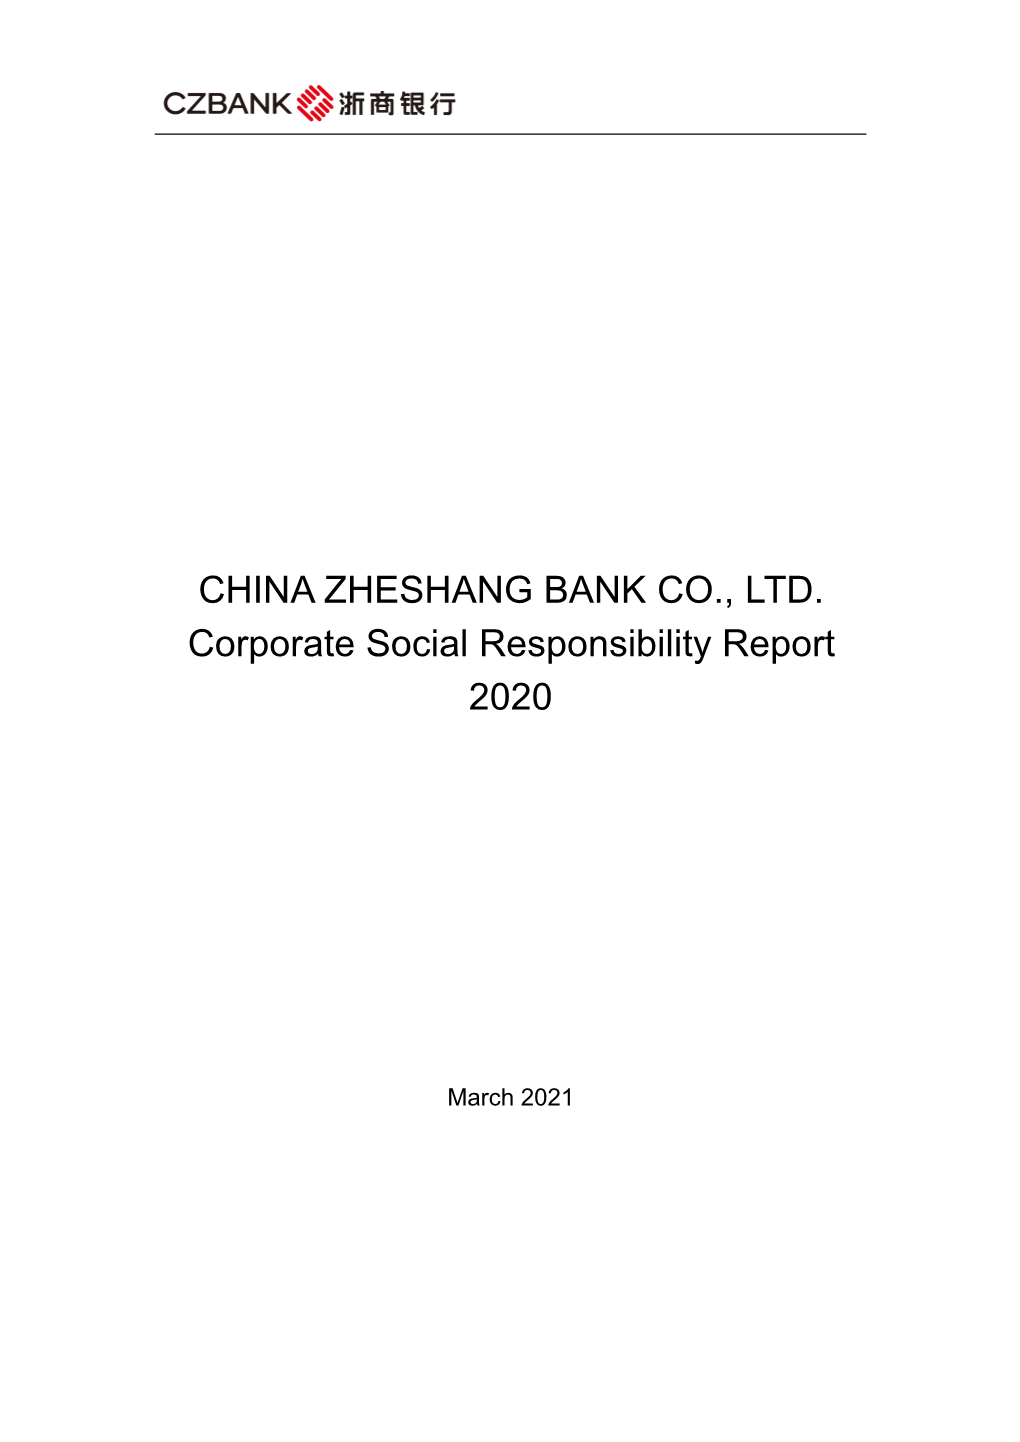 CHINA ZHESHANG BANK CO., LTD. Corporate Social Responsibility Report 2020